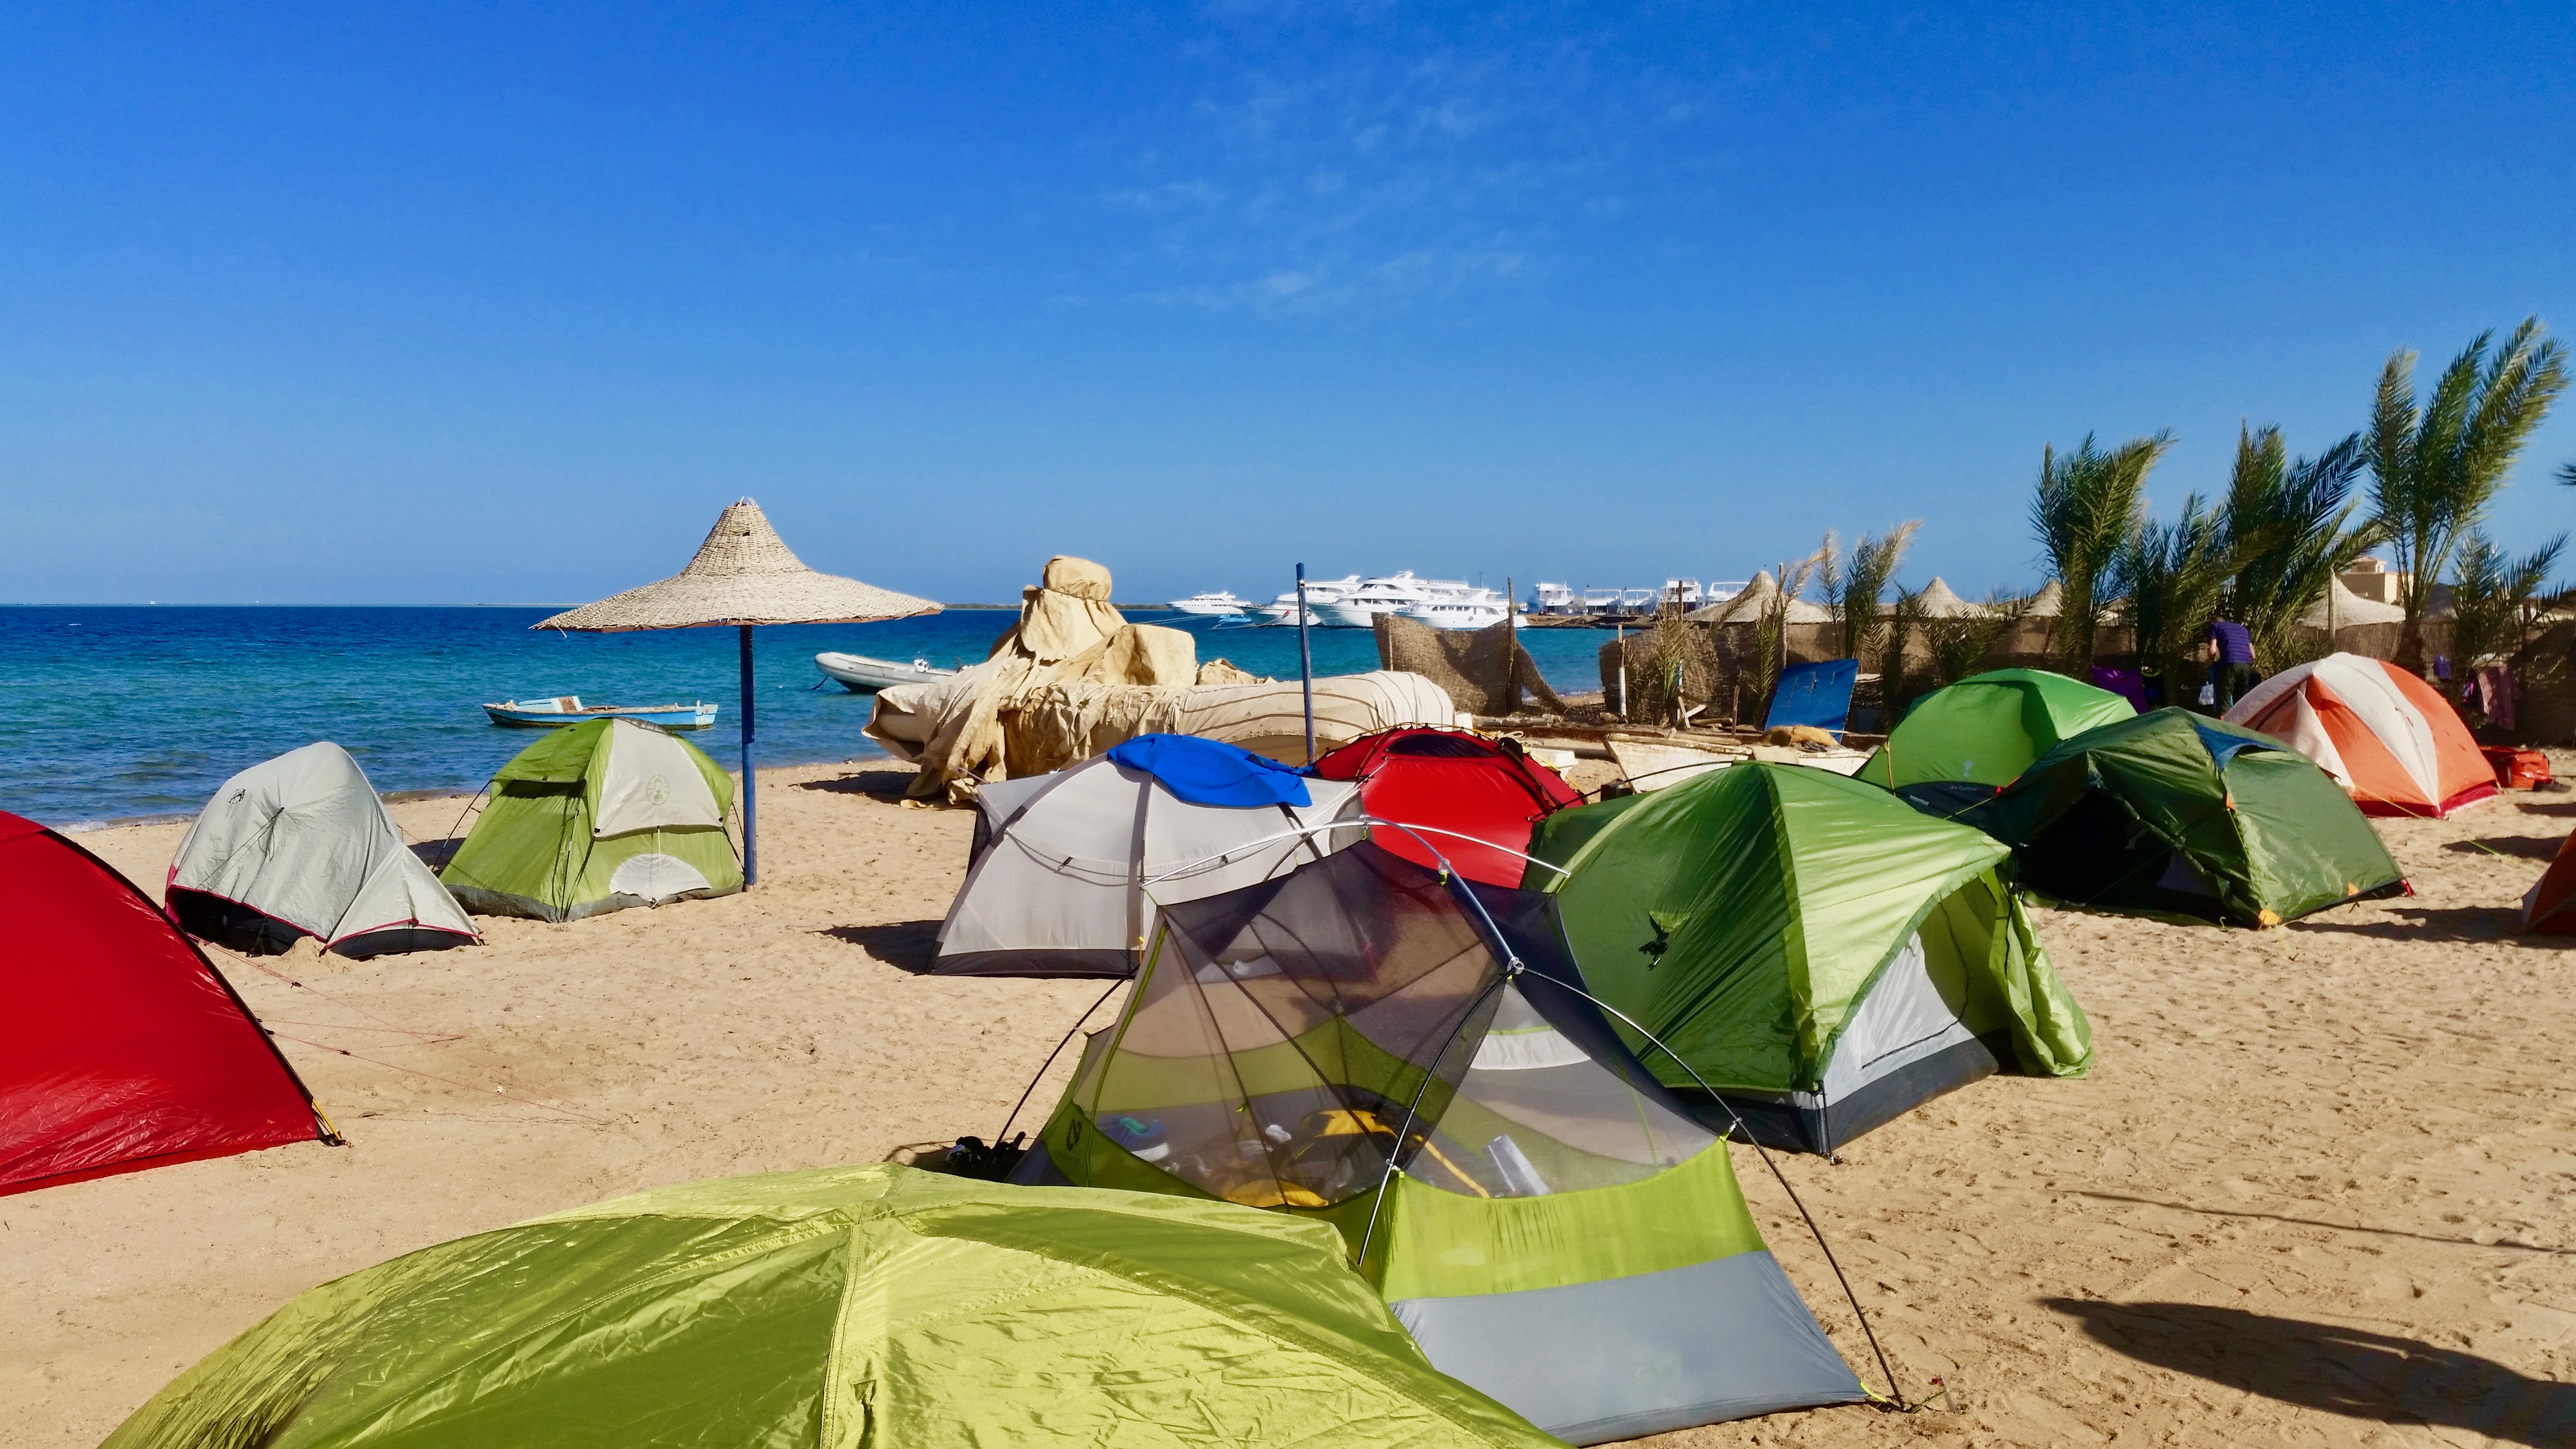 Our tents at the beach—nice, isn't it?